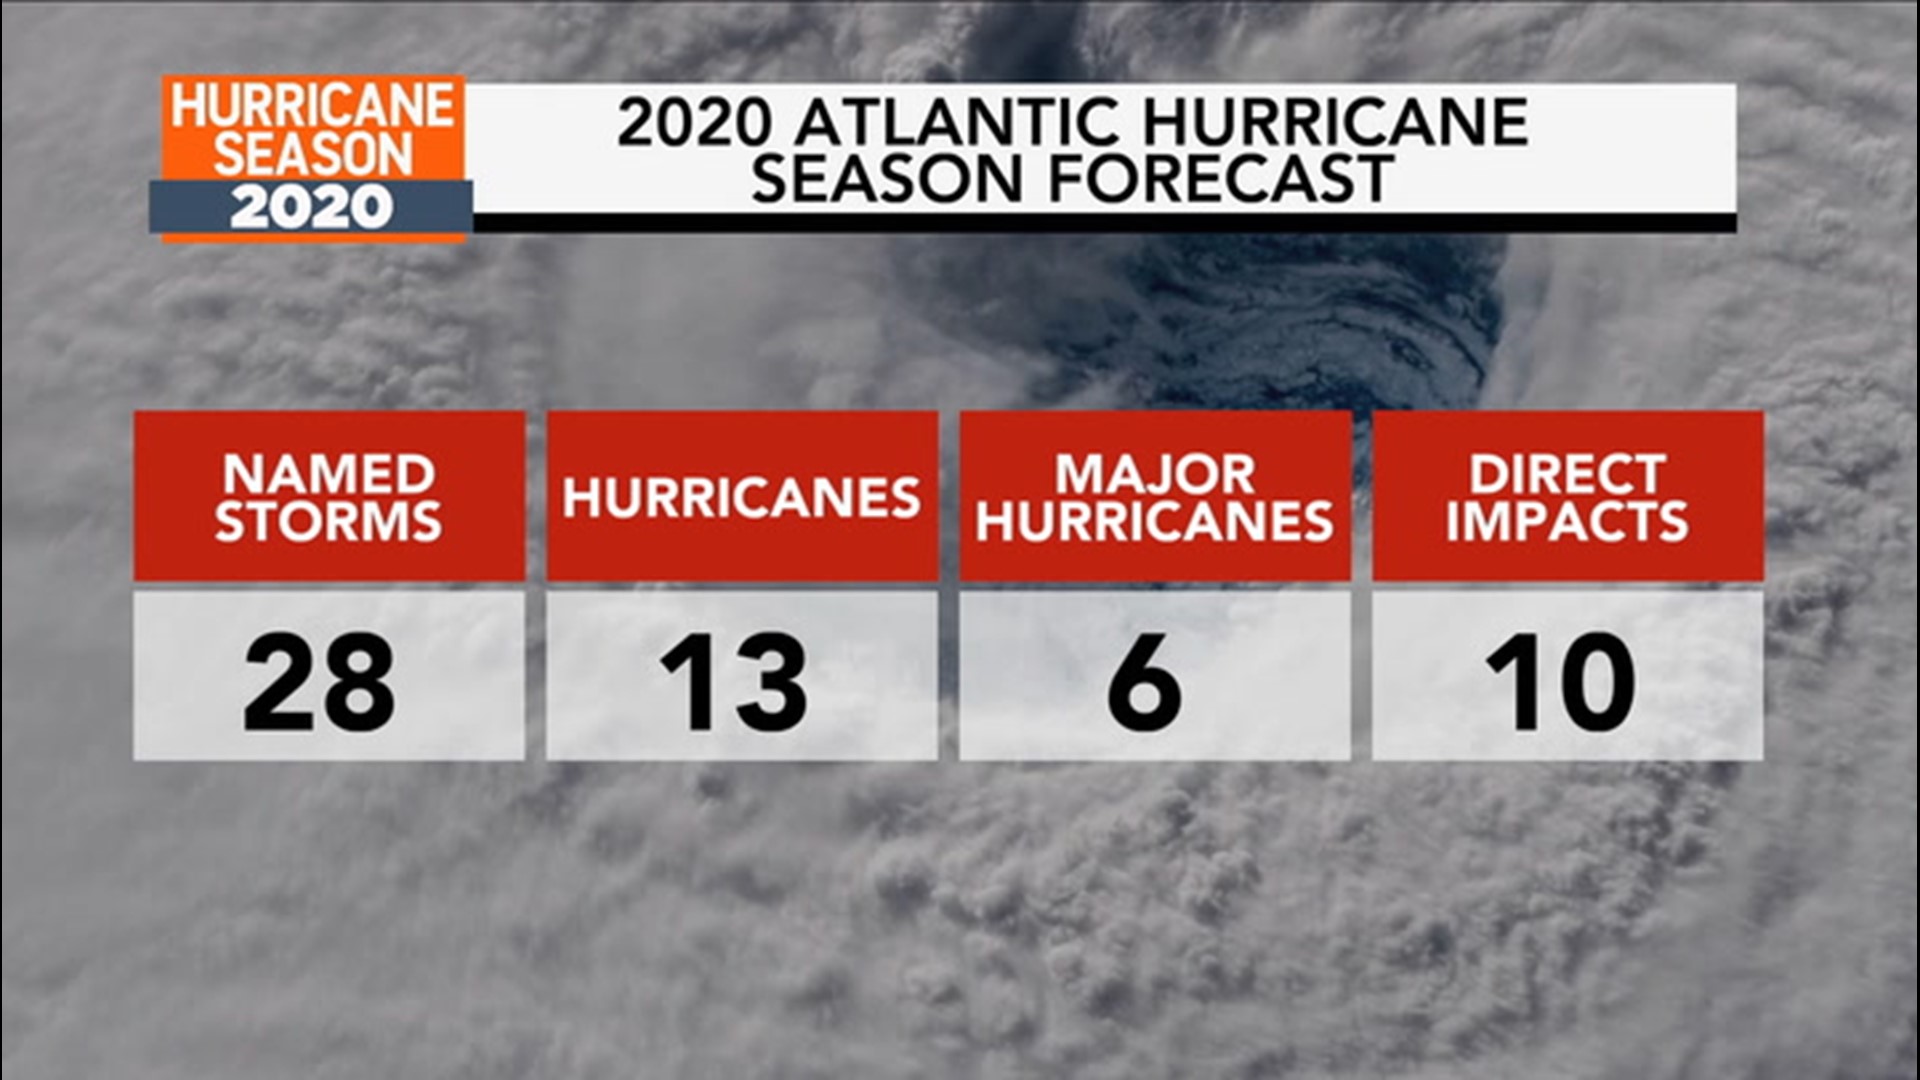 As hurricane season continues to be an active one in the Atlantic Basin, AccuWeather has updated its hurricane season forecast.